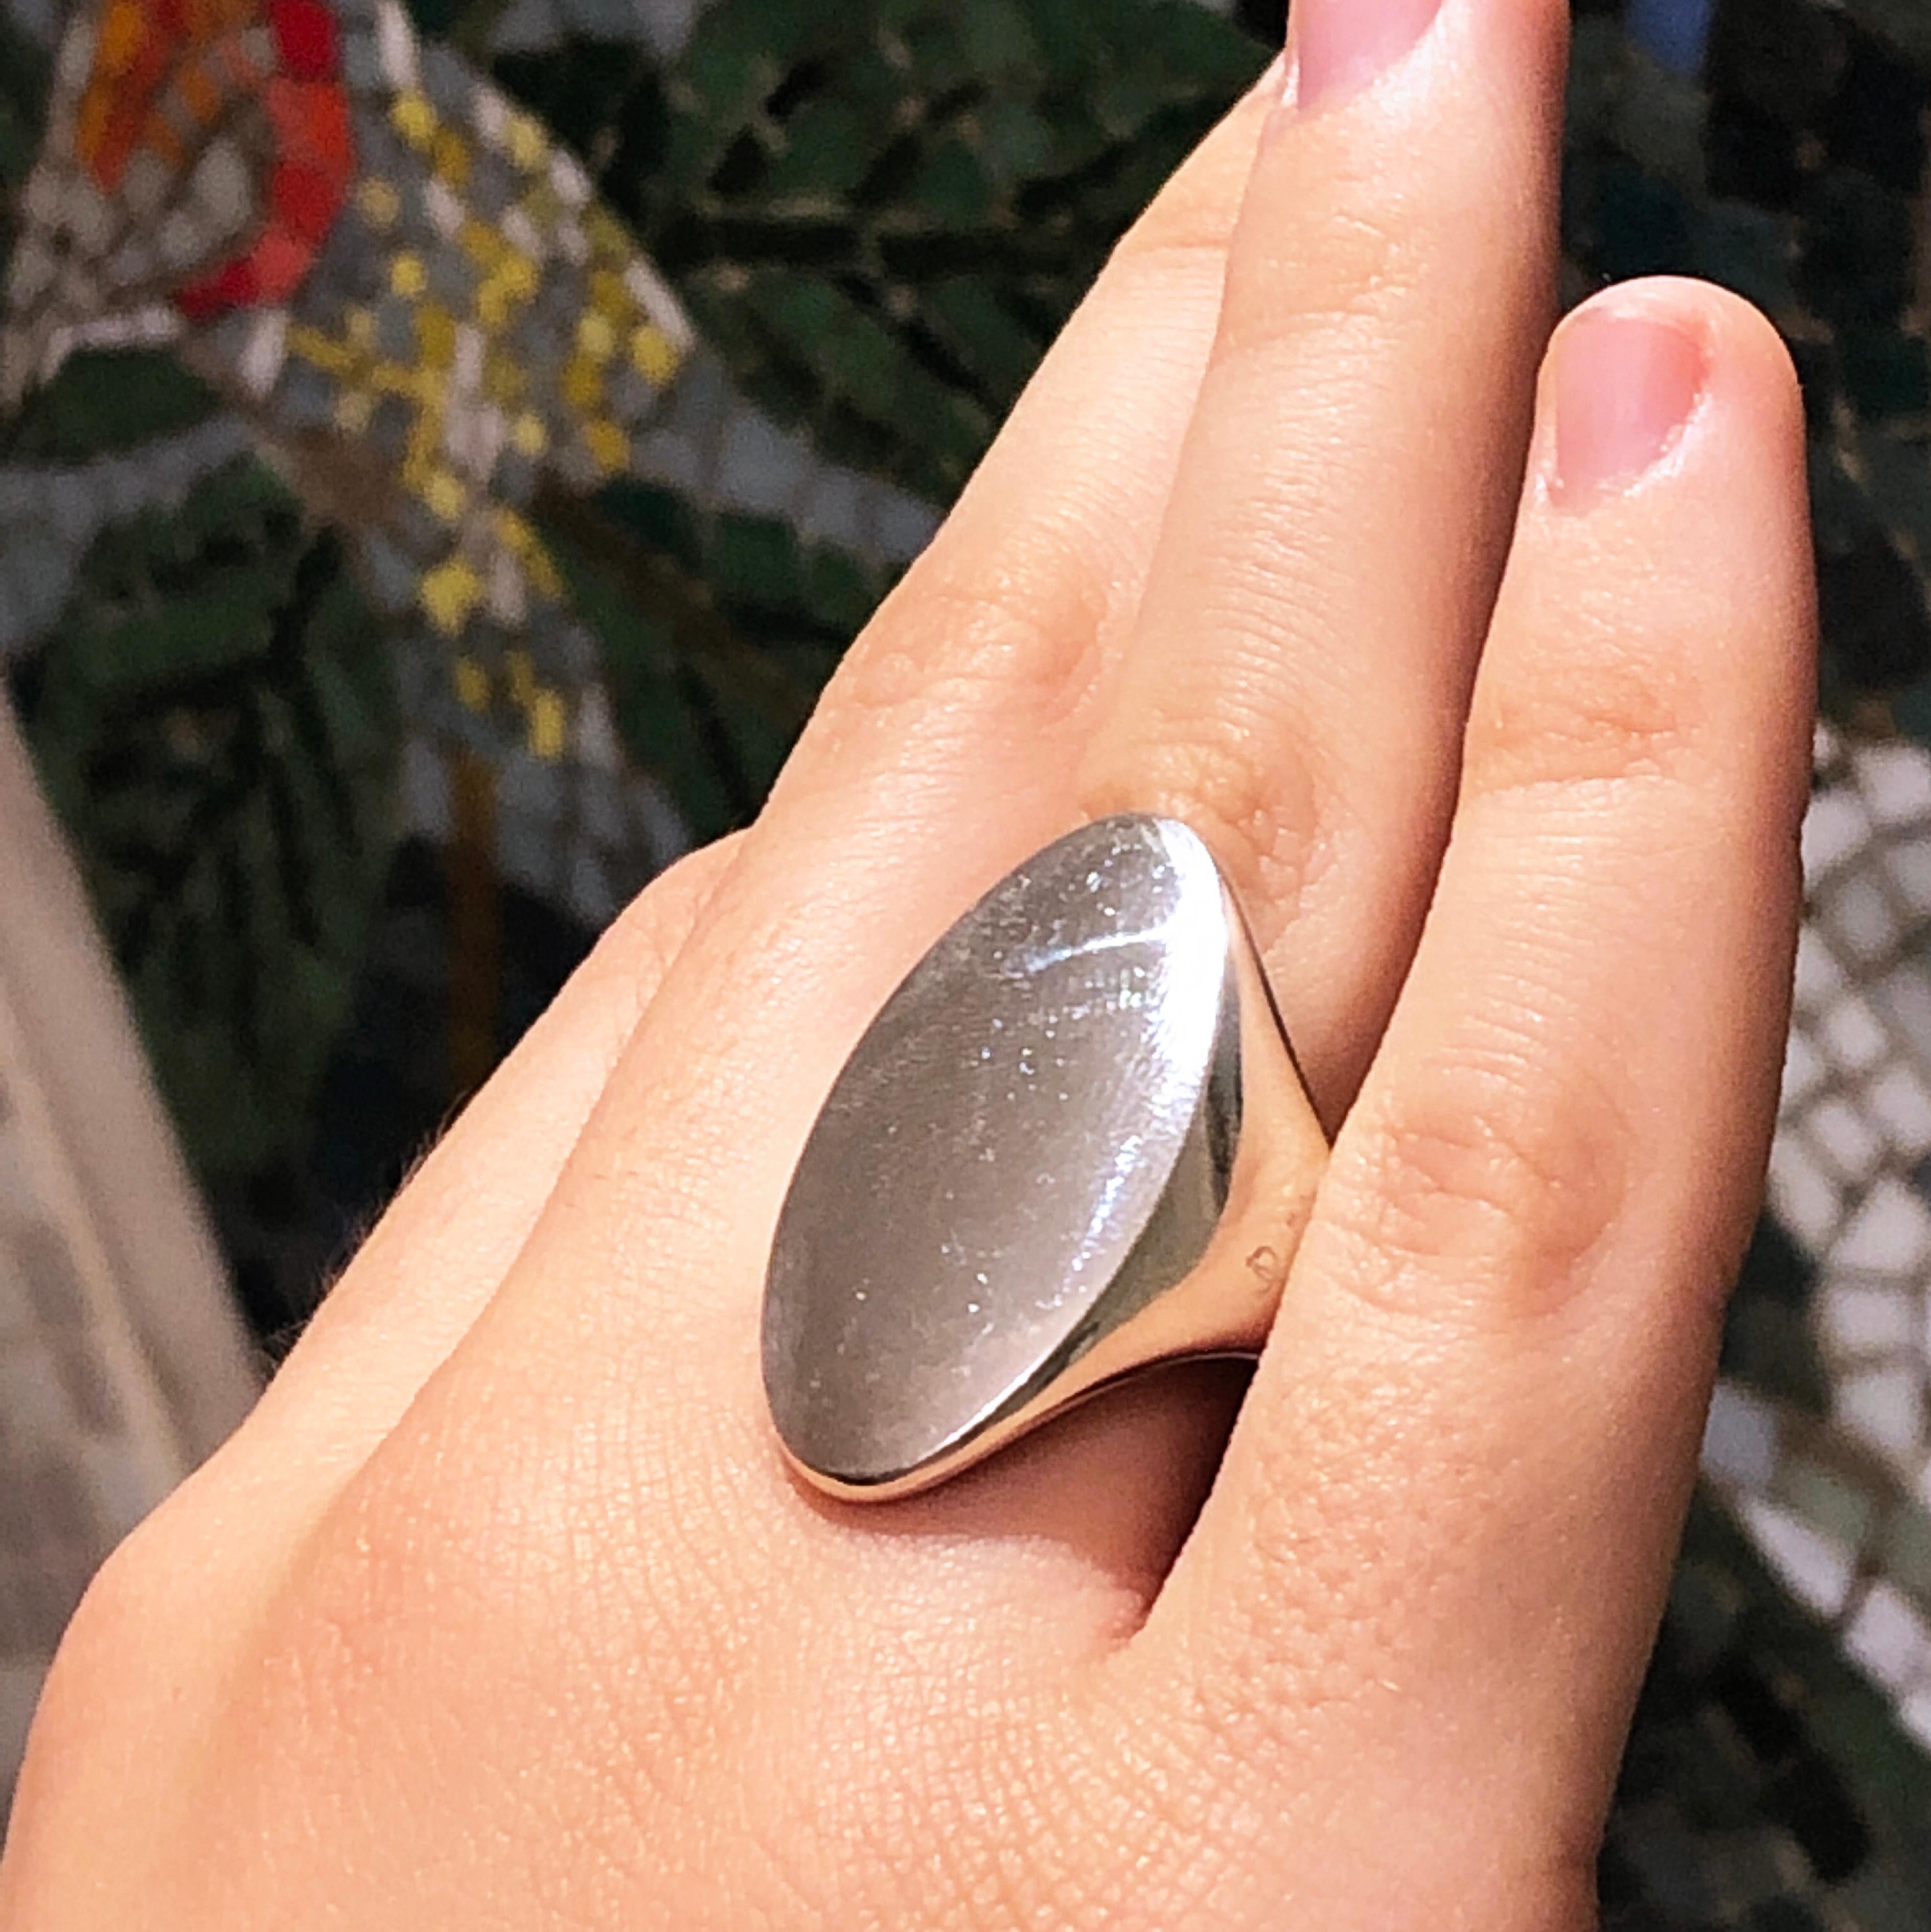 One-of-a-kind Pomellato Solid Sterling Silver, Mirror Finish, Elliptical Shaped Unusual Signet Ring. Few Pieces of this unique, very chic piece were handcrafted in Milan Pomellato Atelier.
In its original Pomellato pouch or case.
Us Size 5 3/4,